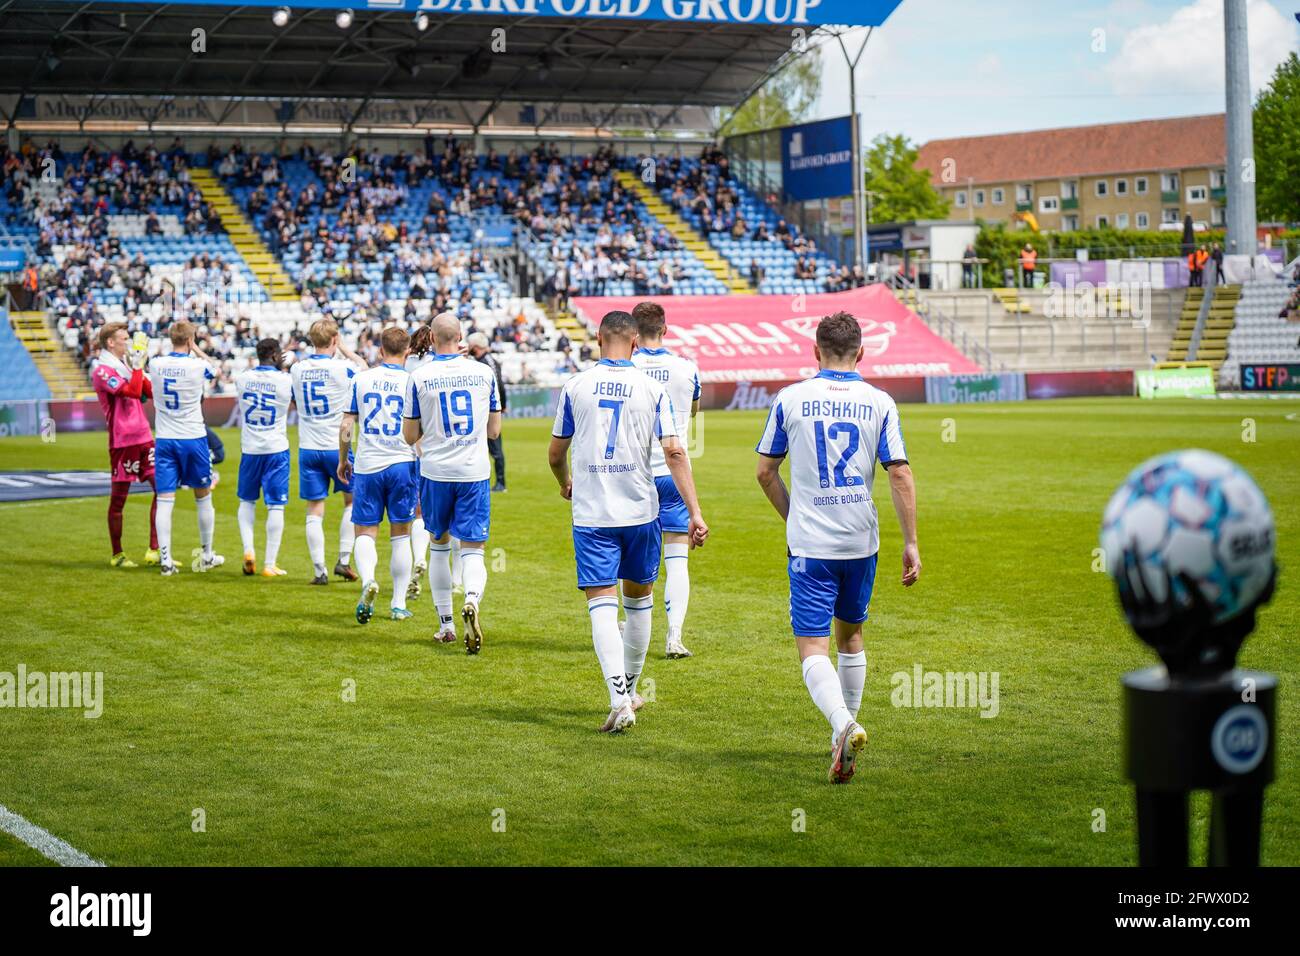 Odense, Denmark. 24th May, 2021. The players OB the pitch for the 3F Superliga match between Odense Boldklub and AC at Nature Energy Park Odense. (Photo Credit: Gonzales